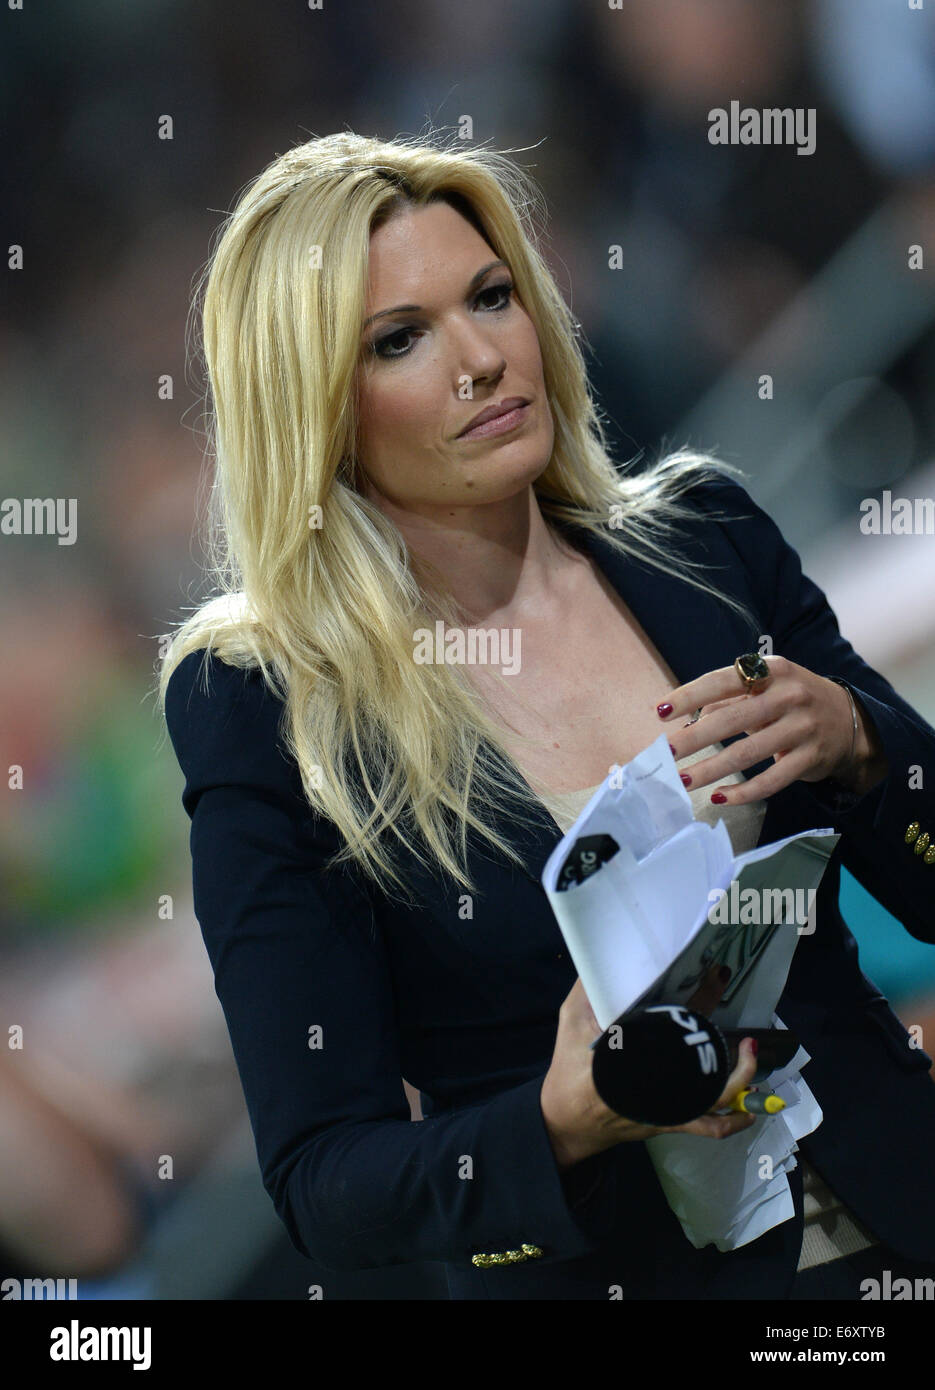 Augsburg, Germany. 29th Aug, 2014. Television presenter Jessica Kastrop is pictured during the Bundesliga soccer match between FC Augsburg and Borussia Dortmund at SGL Arena in Augsburg, Germany, 29 August 2014. Photo: Andreas Gebert/dpa/Alamy Live News Stock Photo